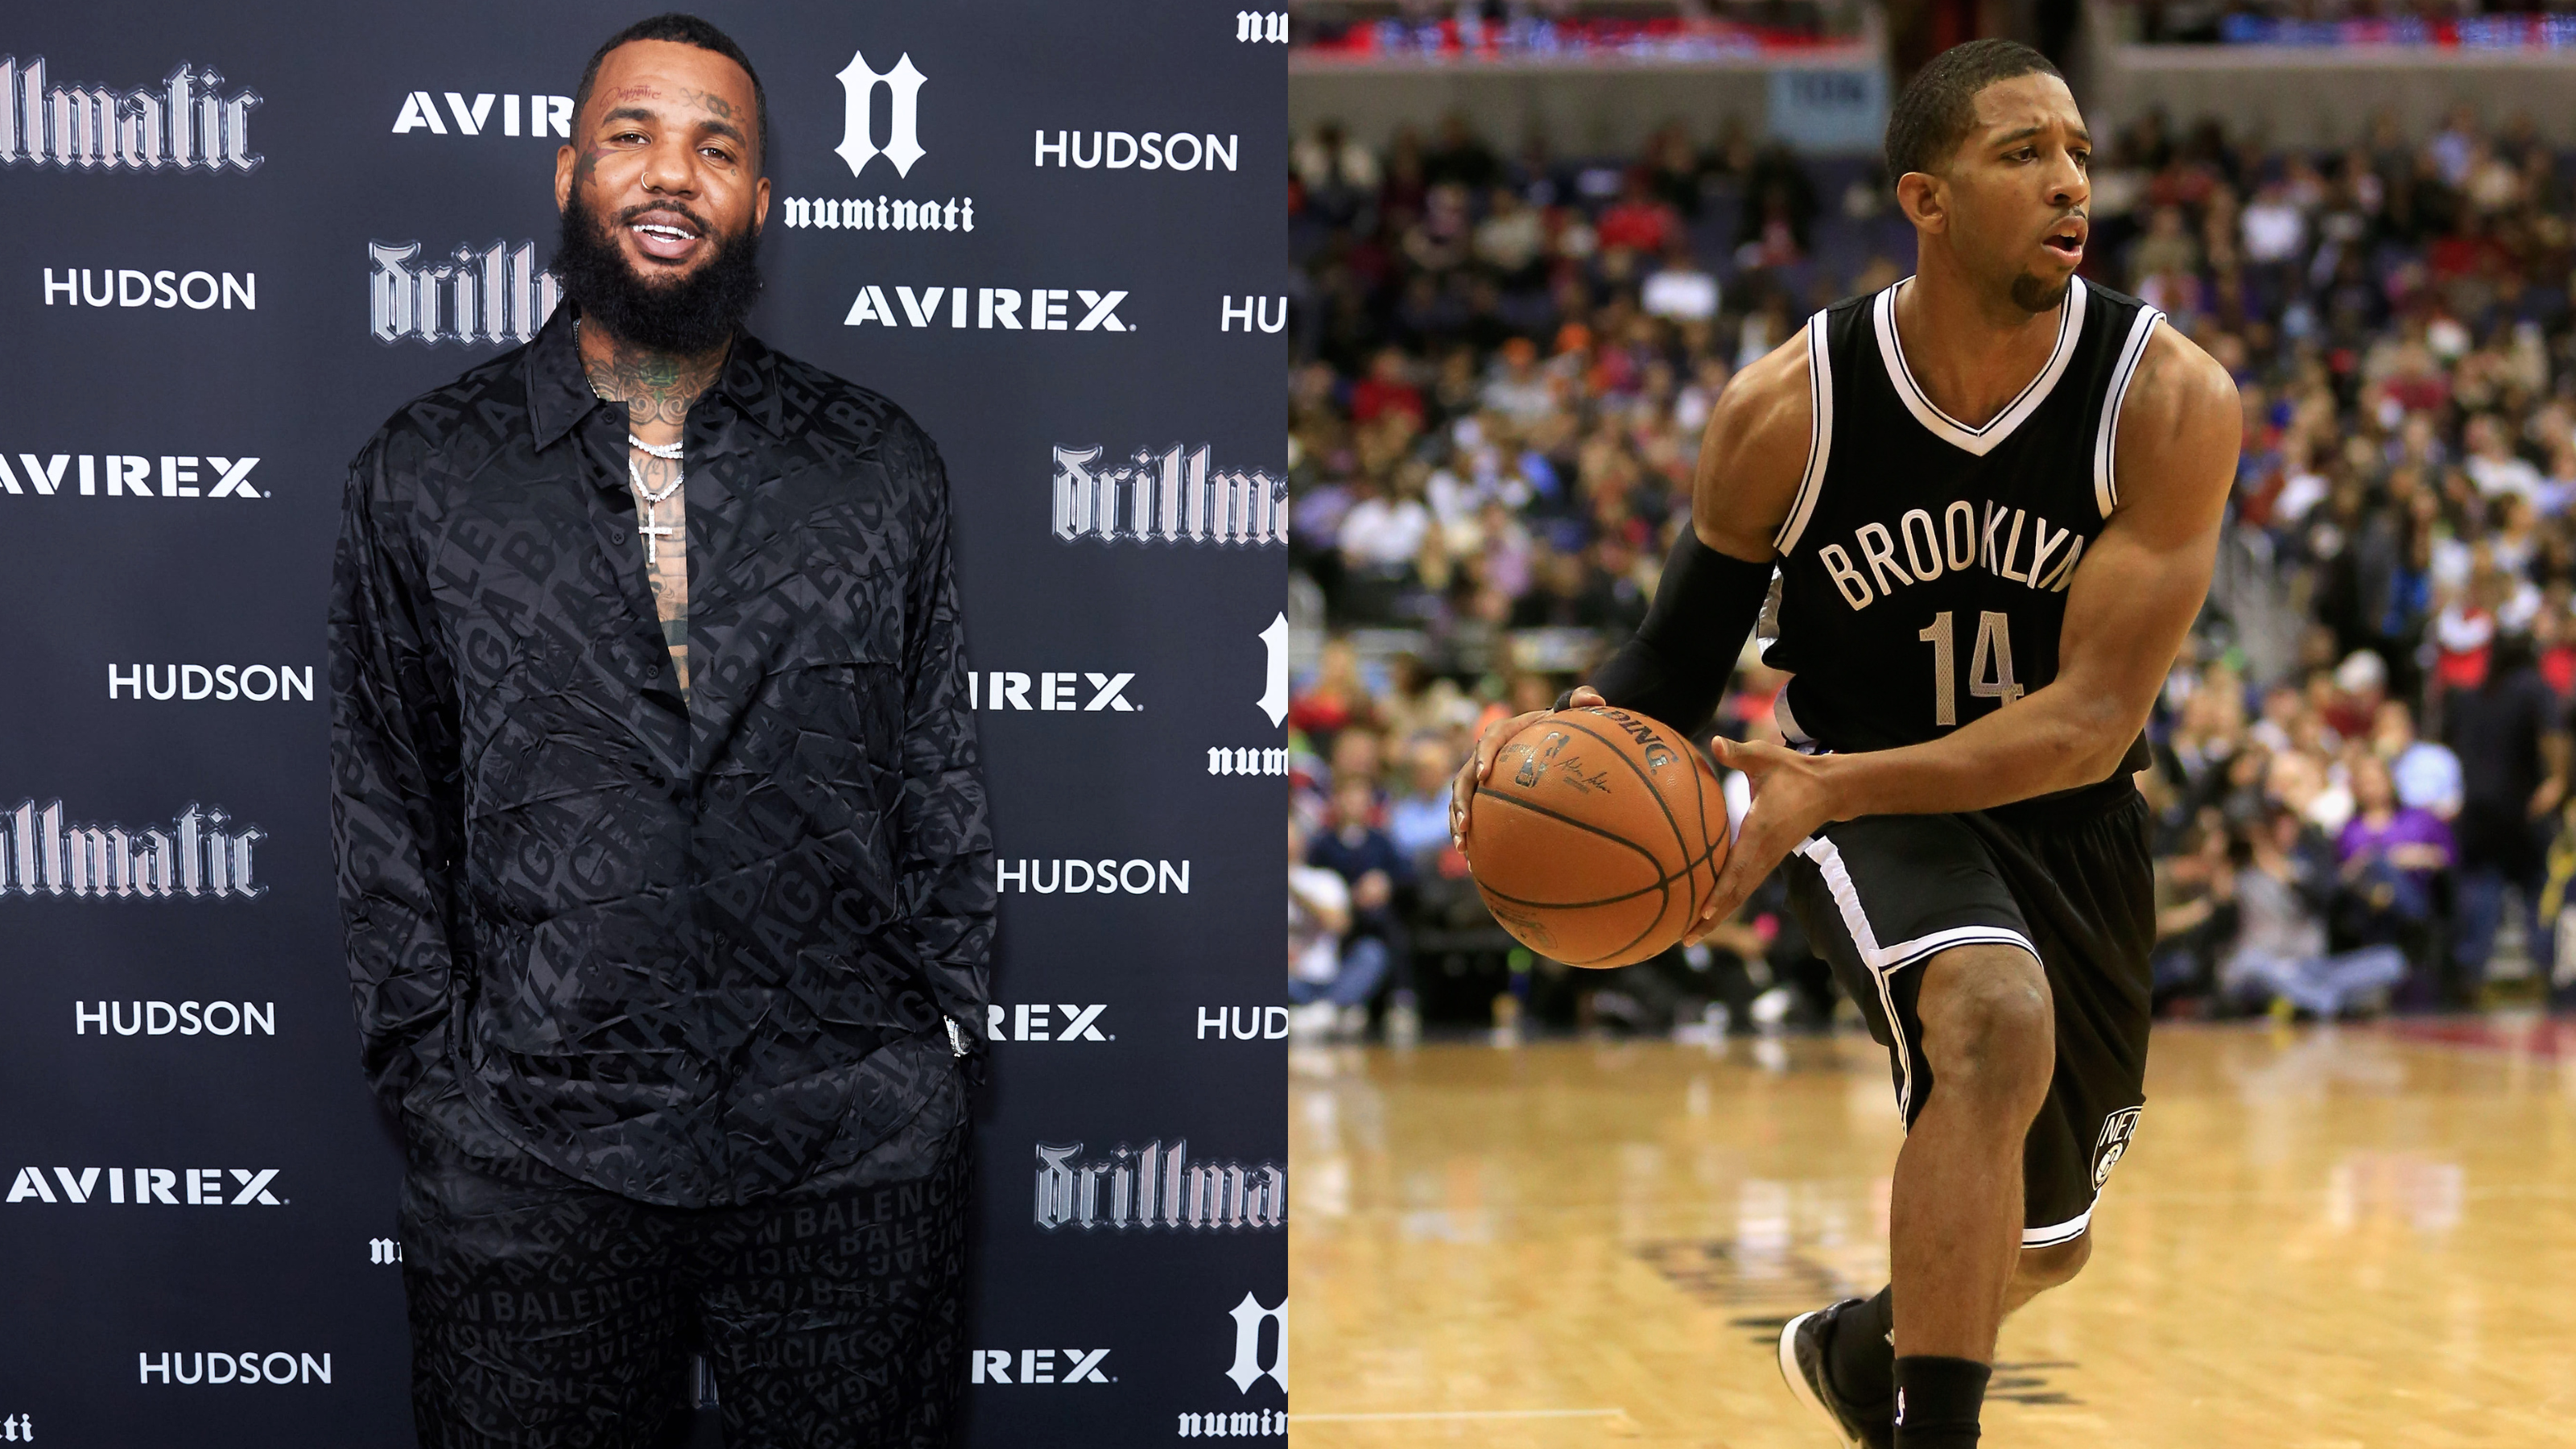 The Game Reacts To Death Of Cousin, Former NBA Player Darius Morris, Found Dead In LA